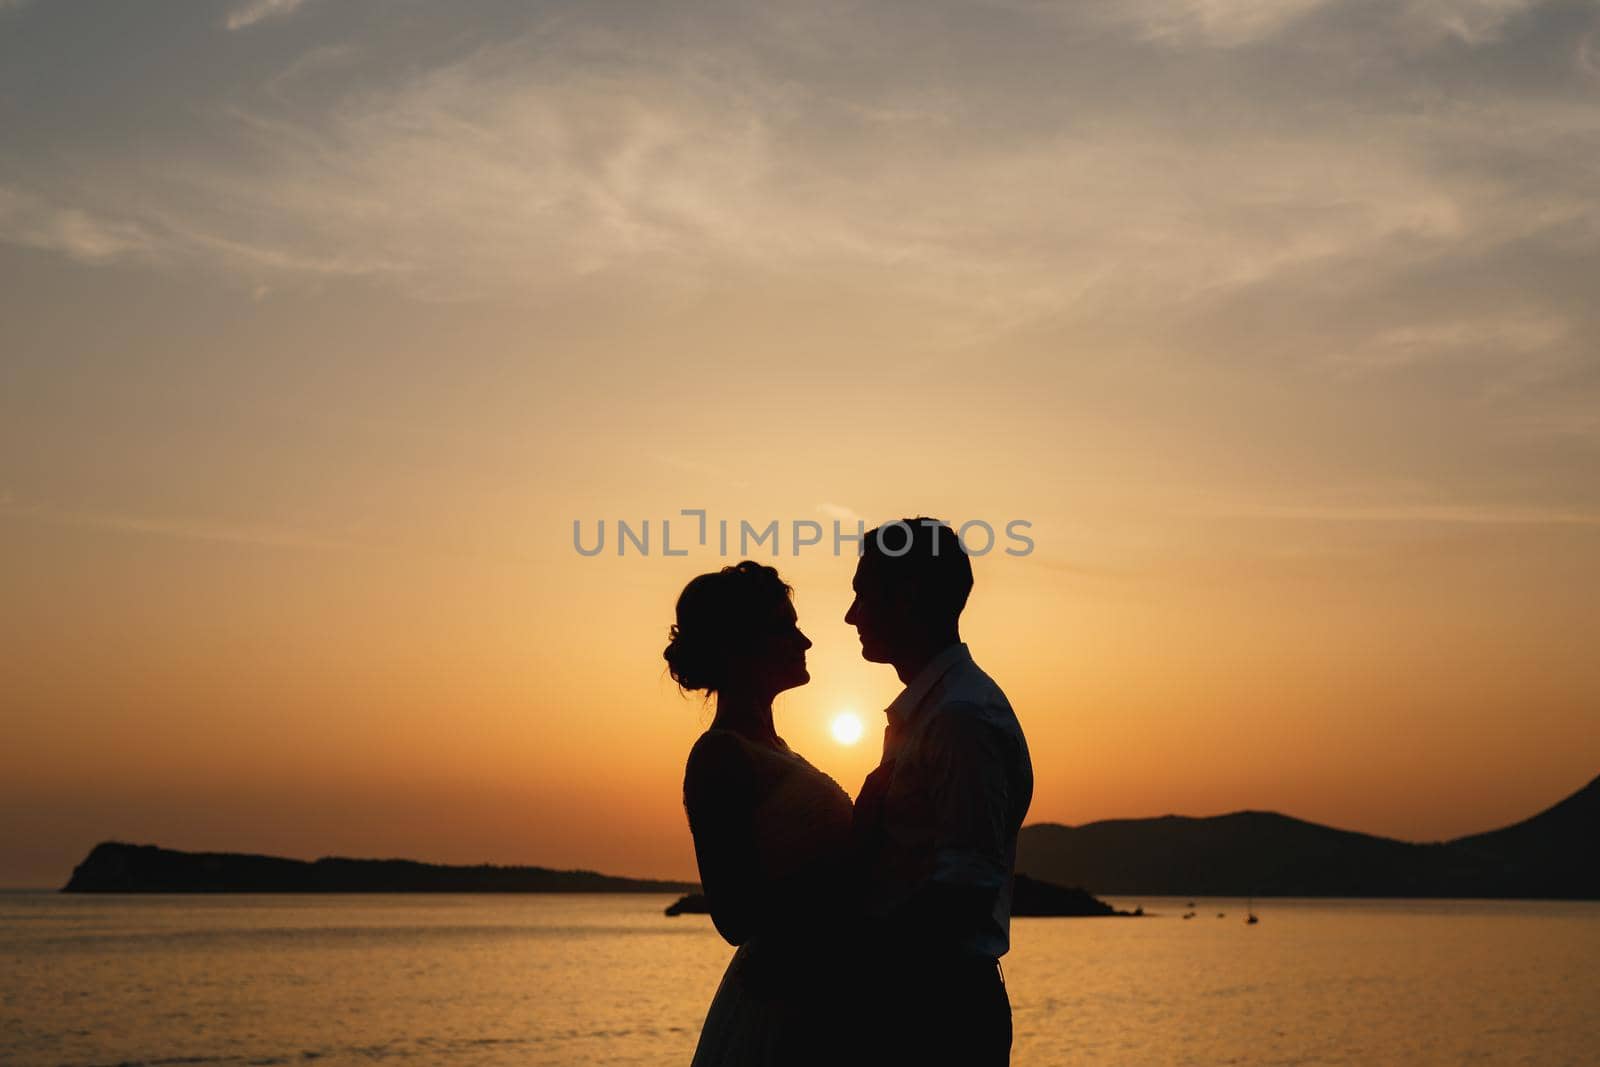 The bride and groom are embracing on the seashore at sunset and look at each other by Nadtochiy